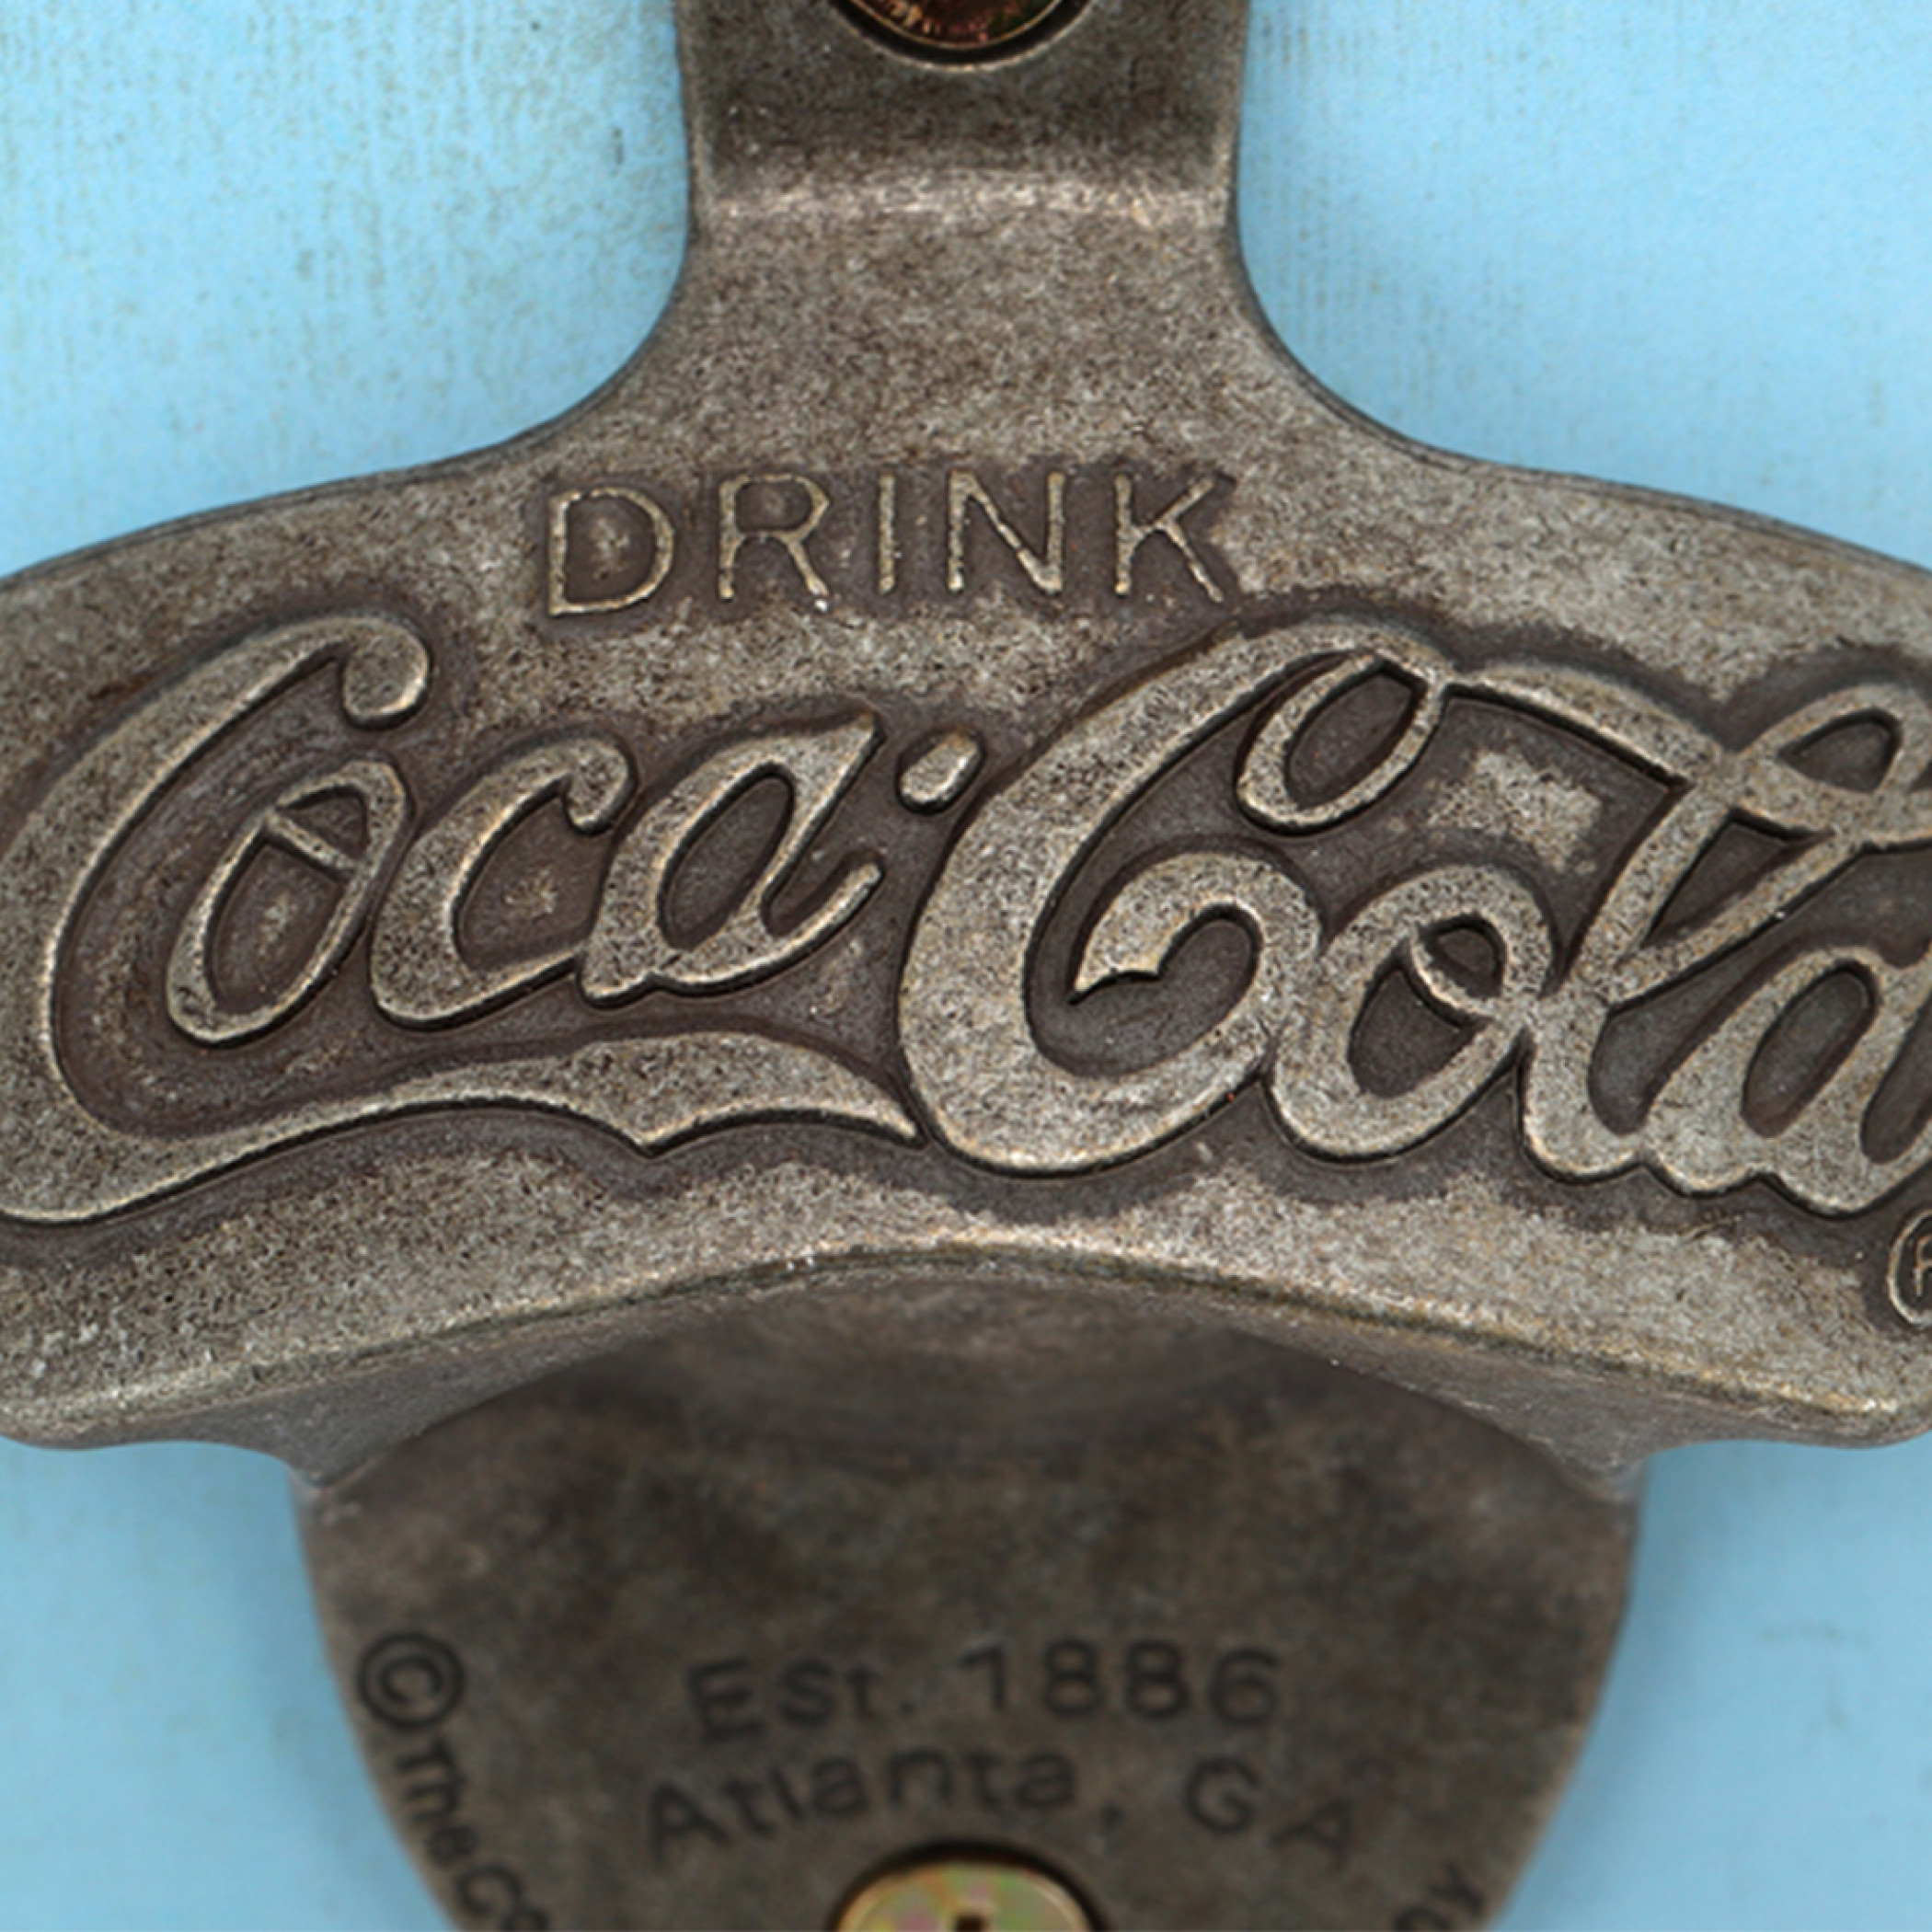 Coca-Cola Yippee! Things Go Better With Coke Mounted Bottle Opener